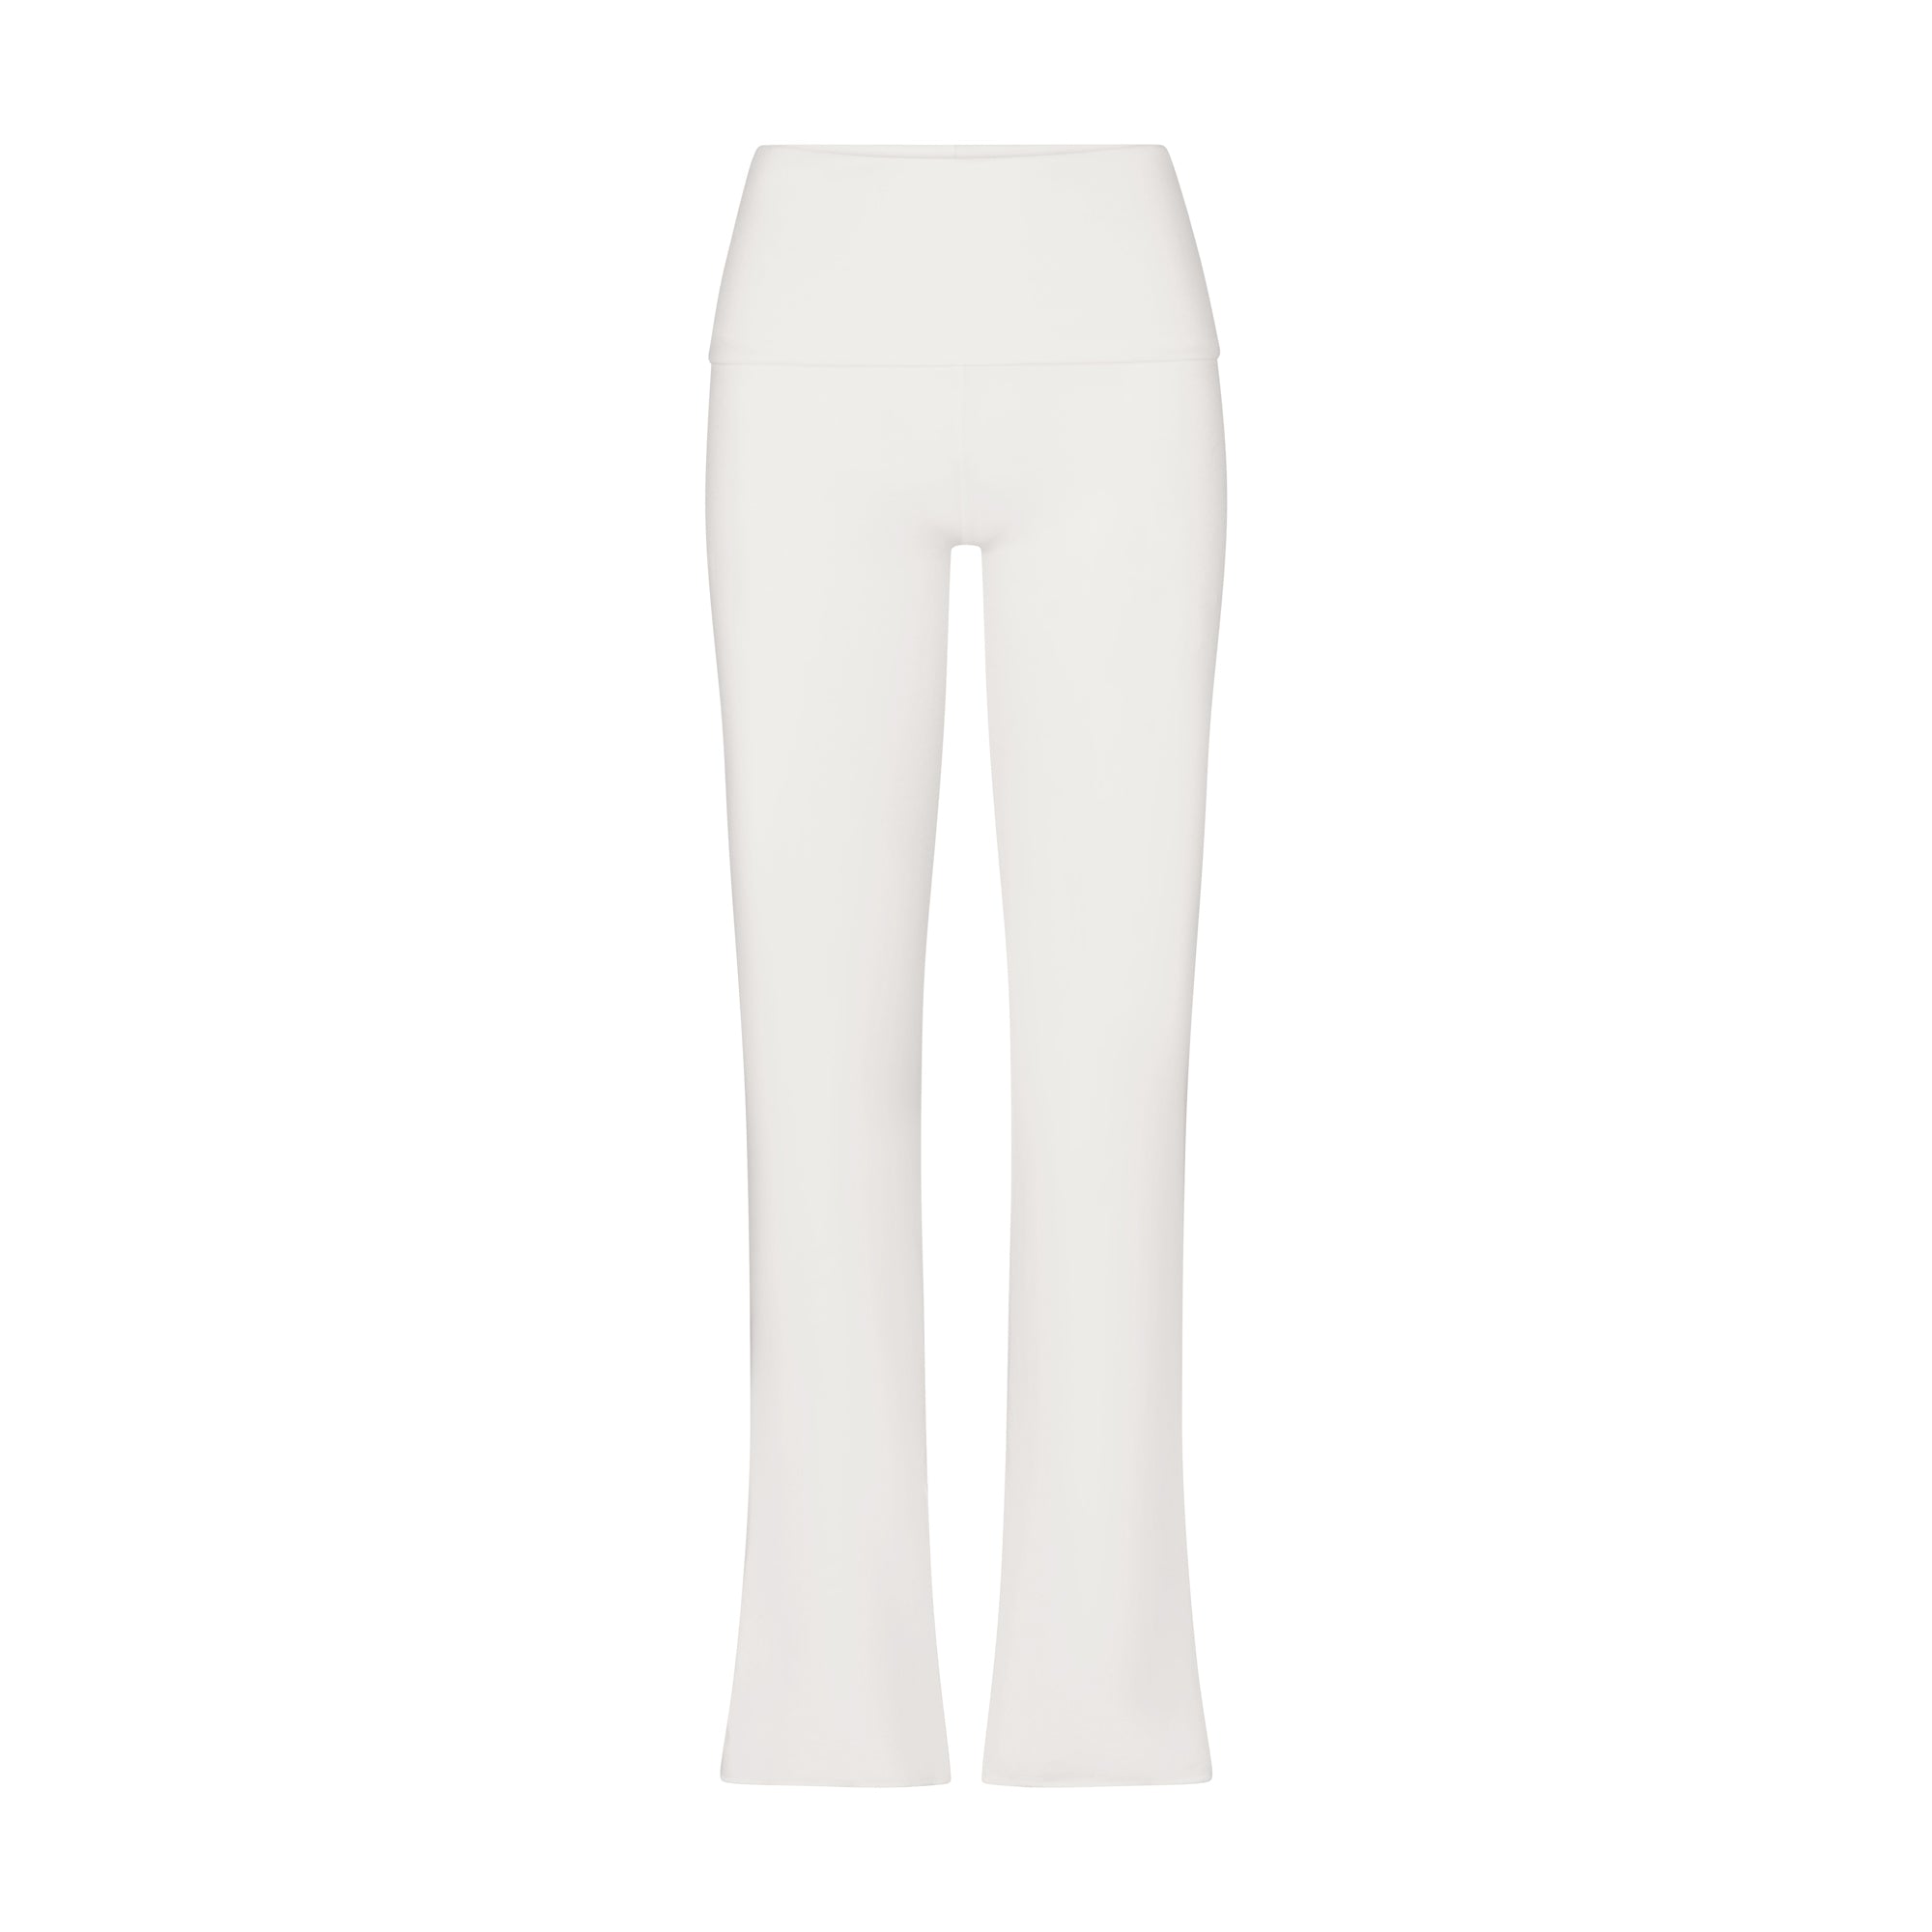 COTTON JERSEY FOLDOVER PANT | MARBLE - COTTON JERSEY FOLDOVER PANT | MARBLE